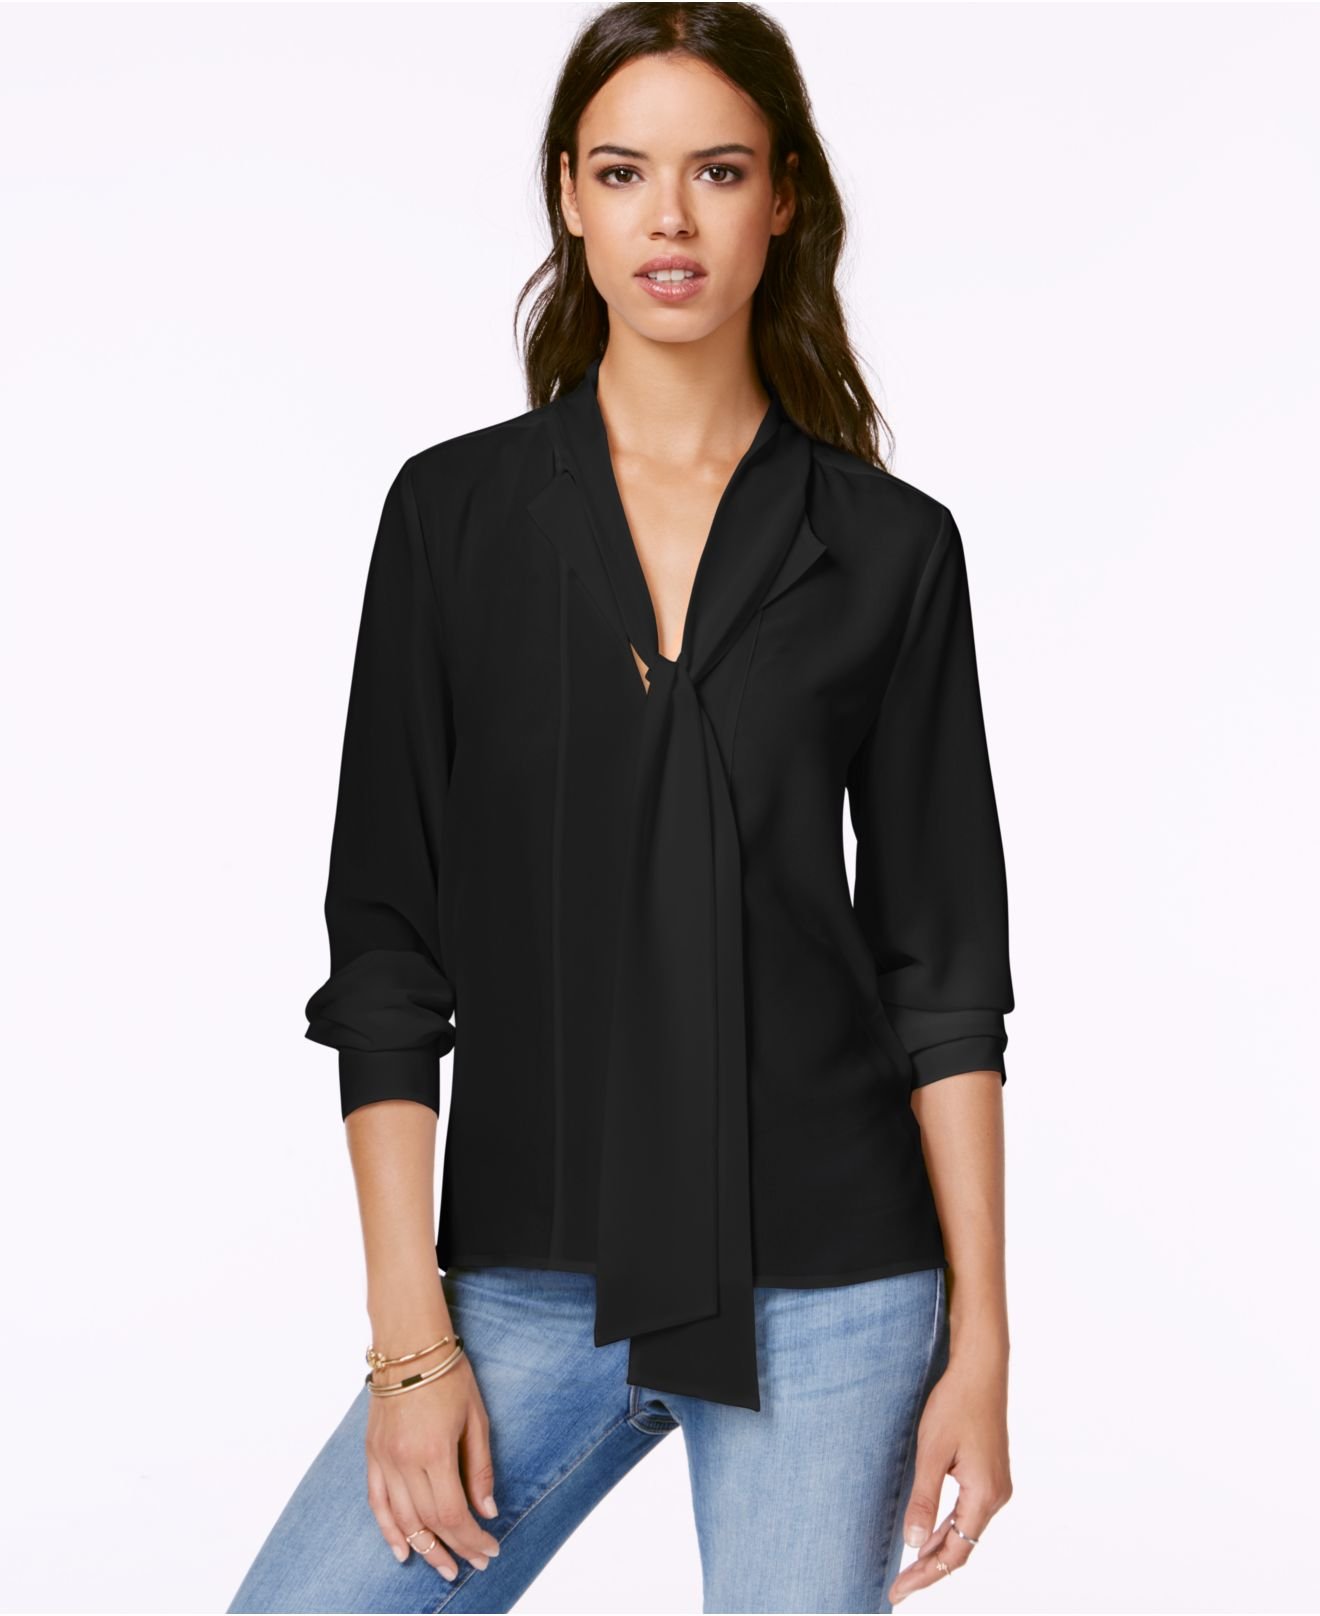 Lyst - Sanctuary Sacntuary Long-sleeve Tie-neck Blouse in Black